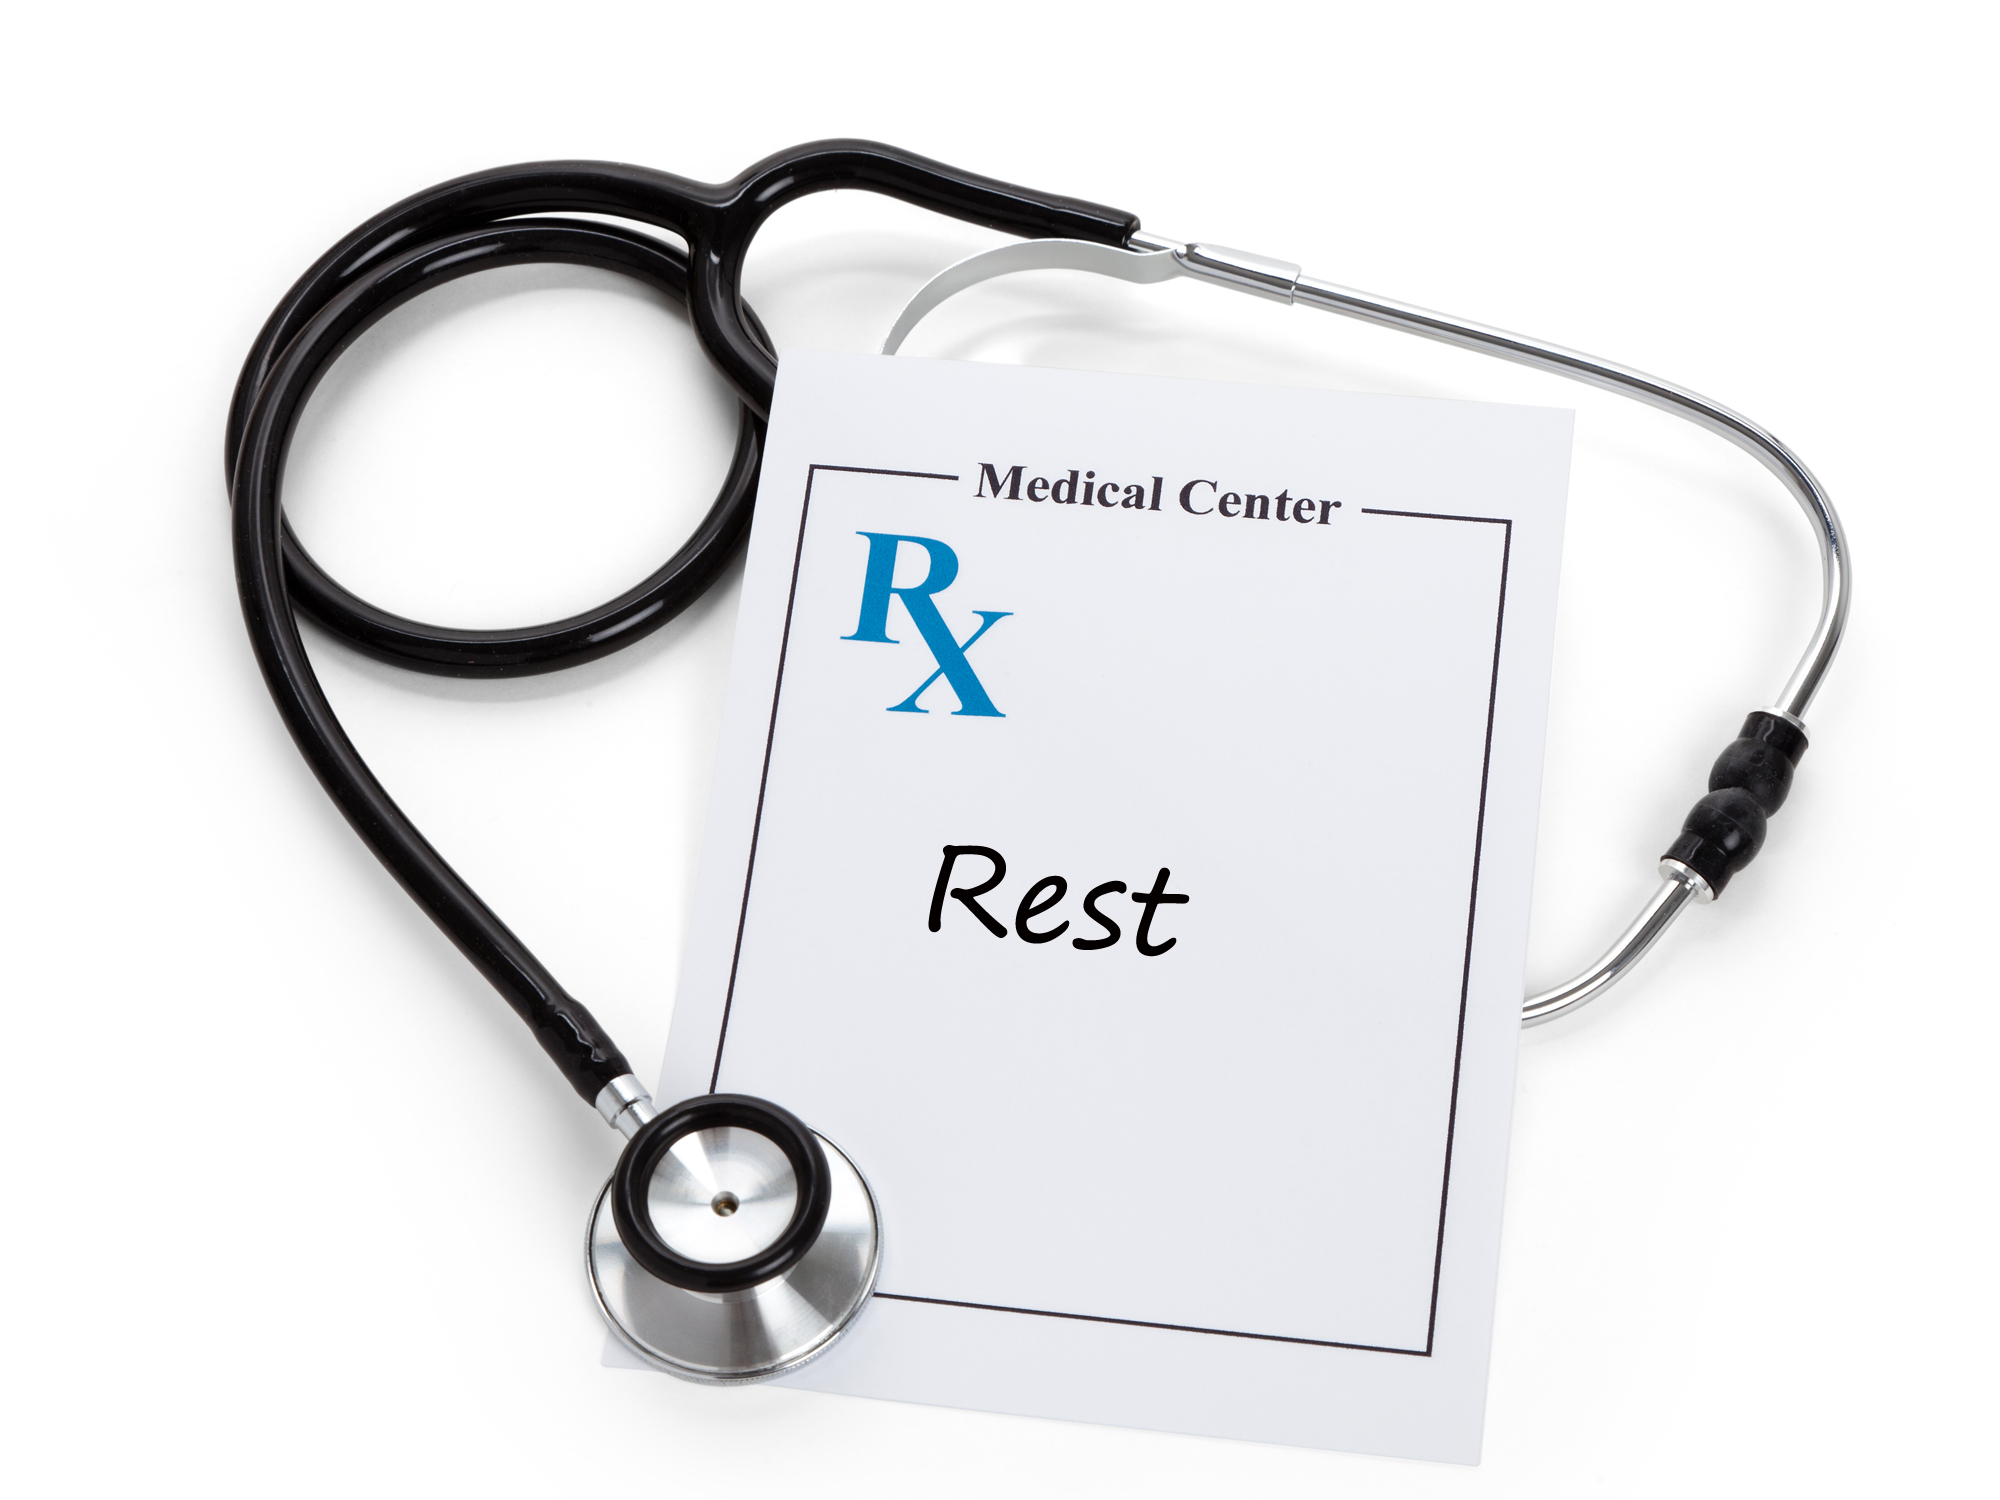 Do you need an Rx for more rest?